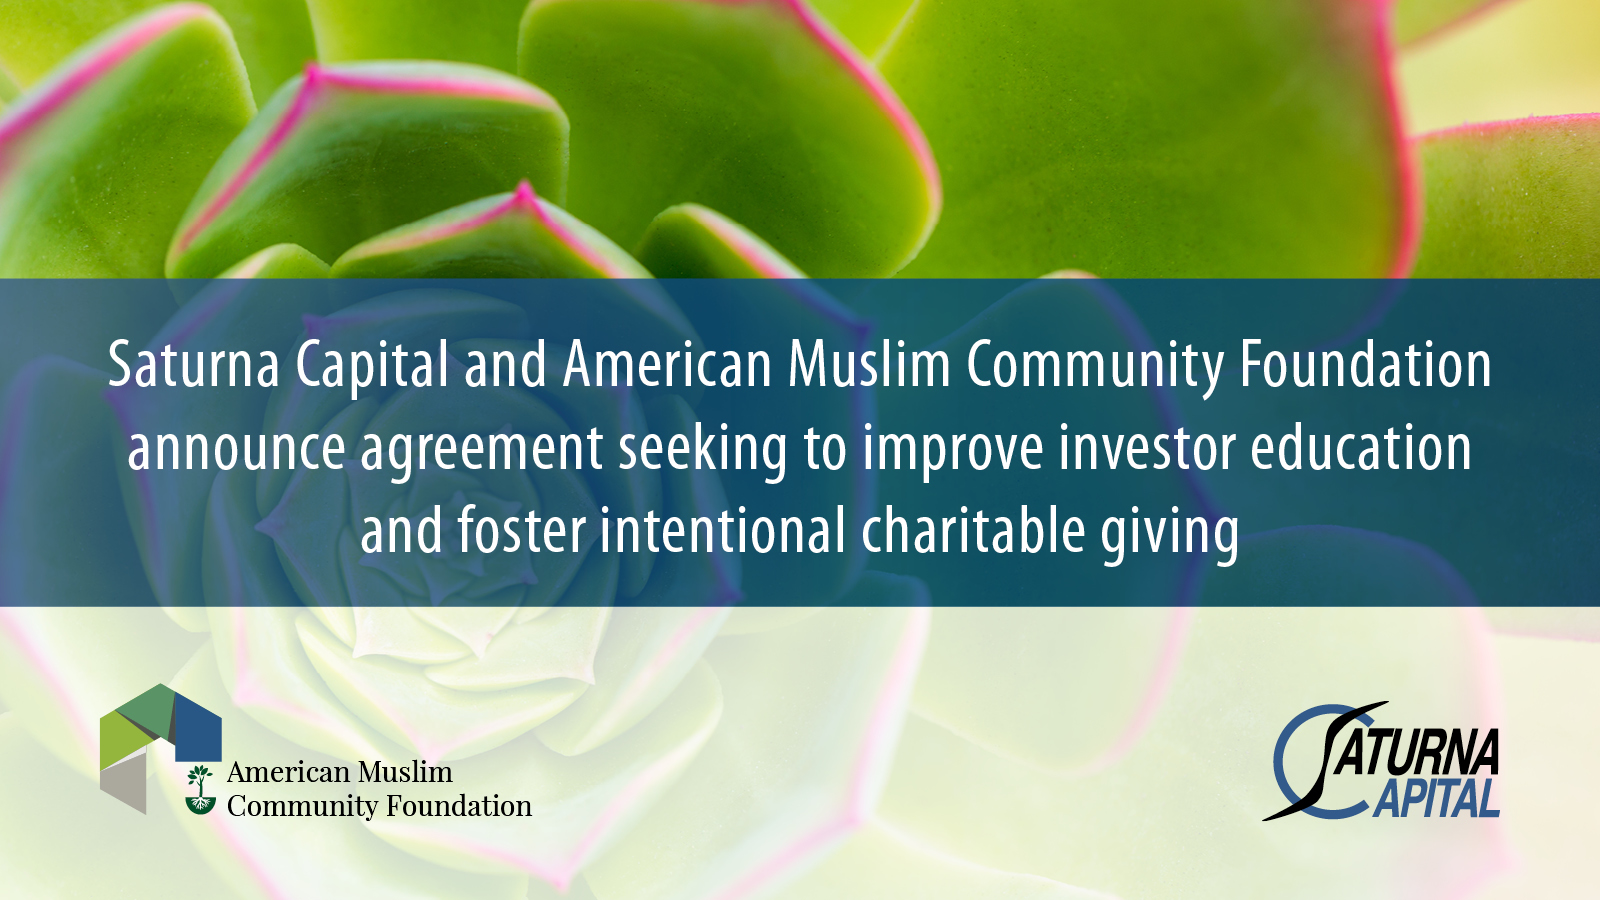 Saturna Capital and American Muslim Community Foundation announce agreement seeking to improve investor education and foster intentional charitable giving.